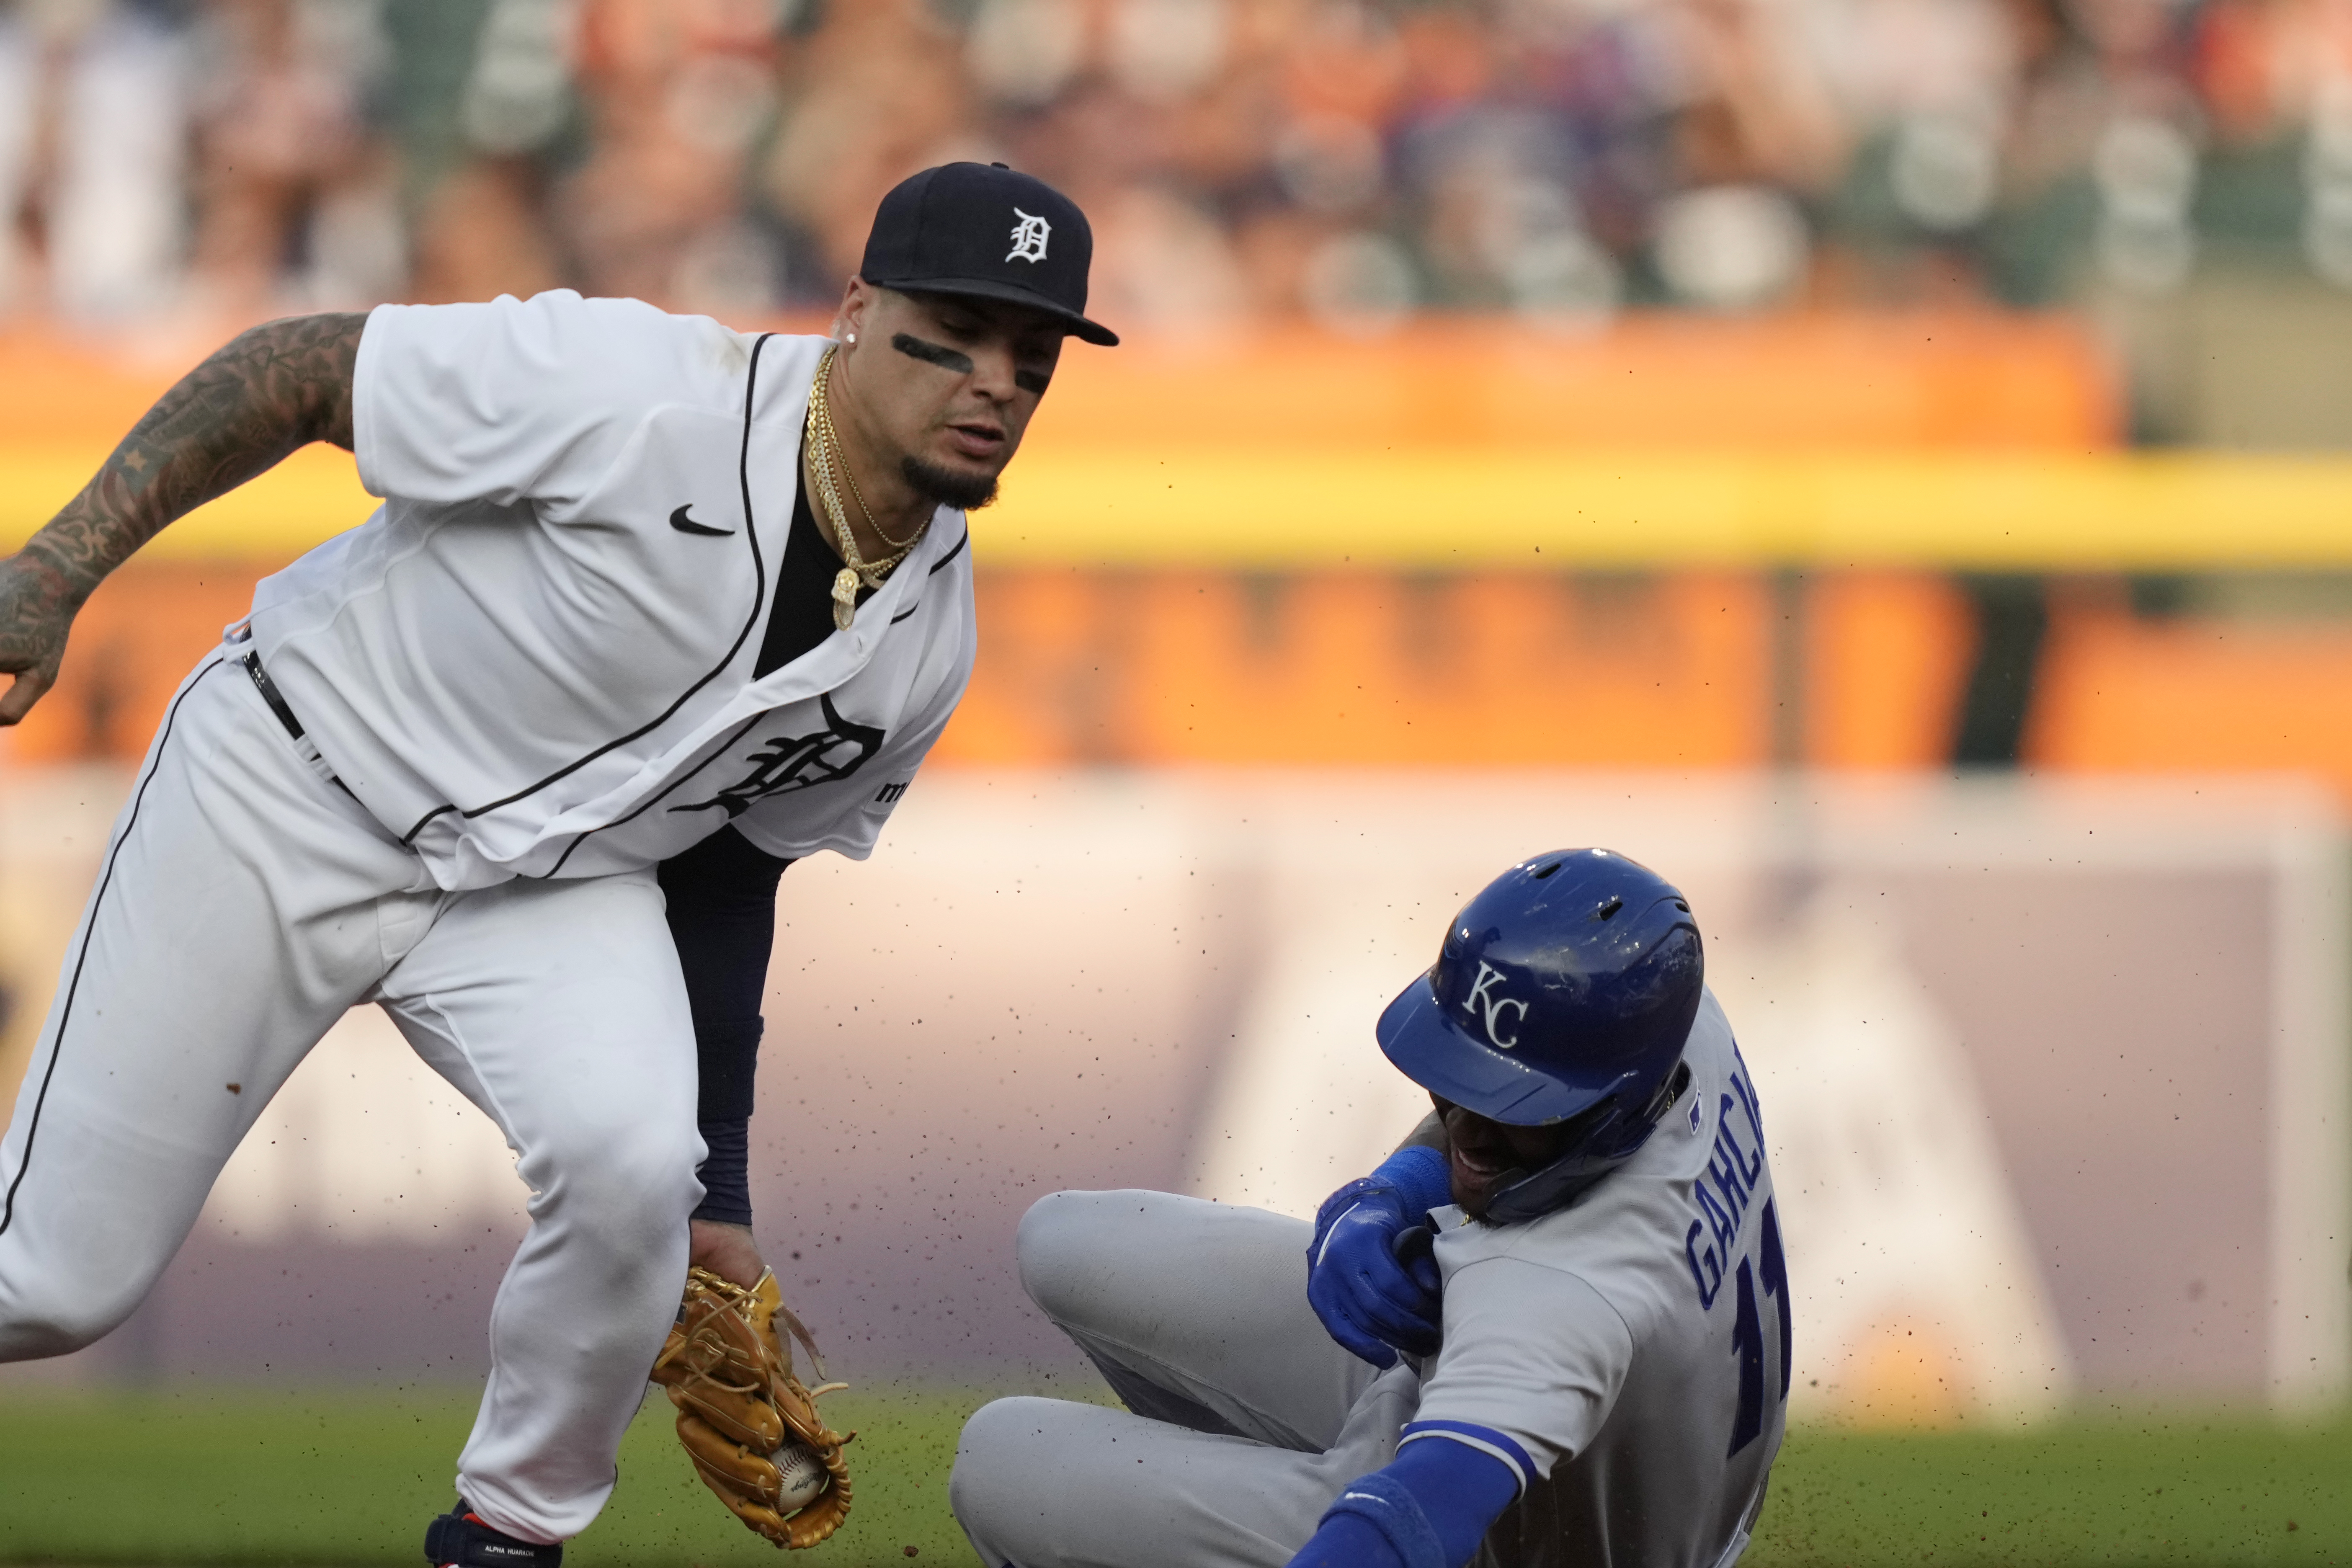 Tigers lineup update: Miguel Cabrera to rest in Game 1 of